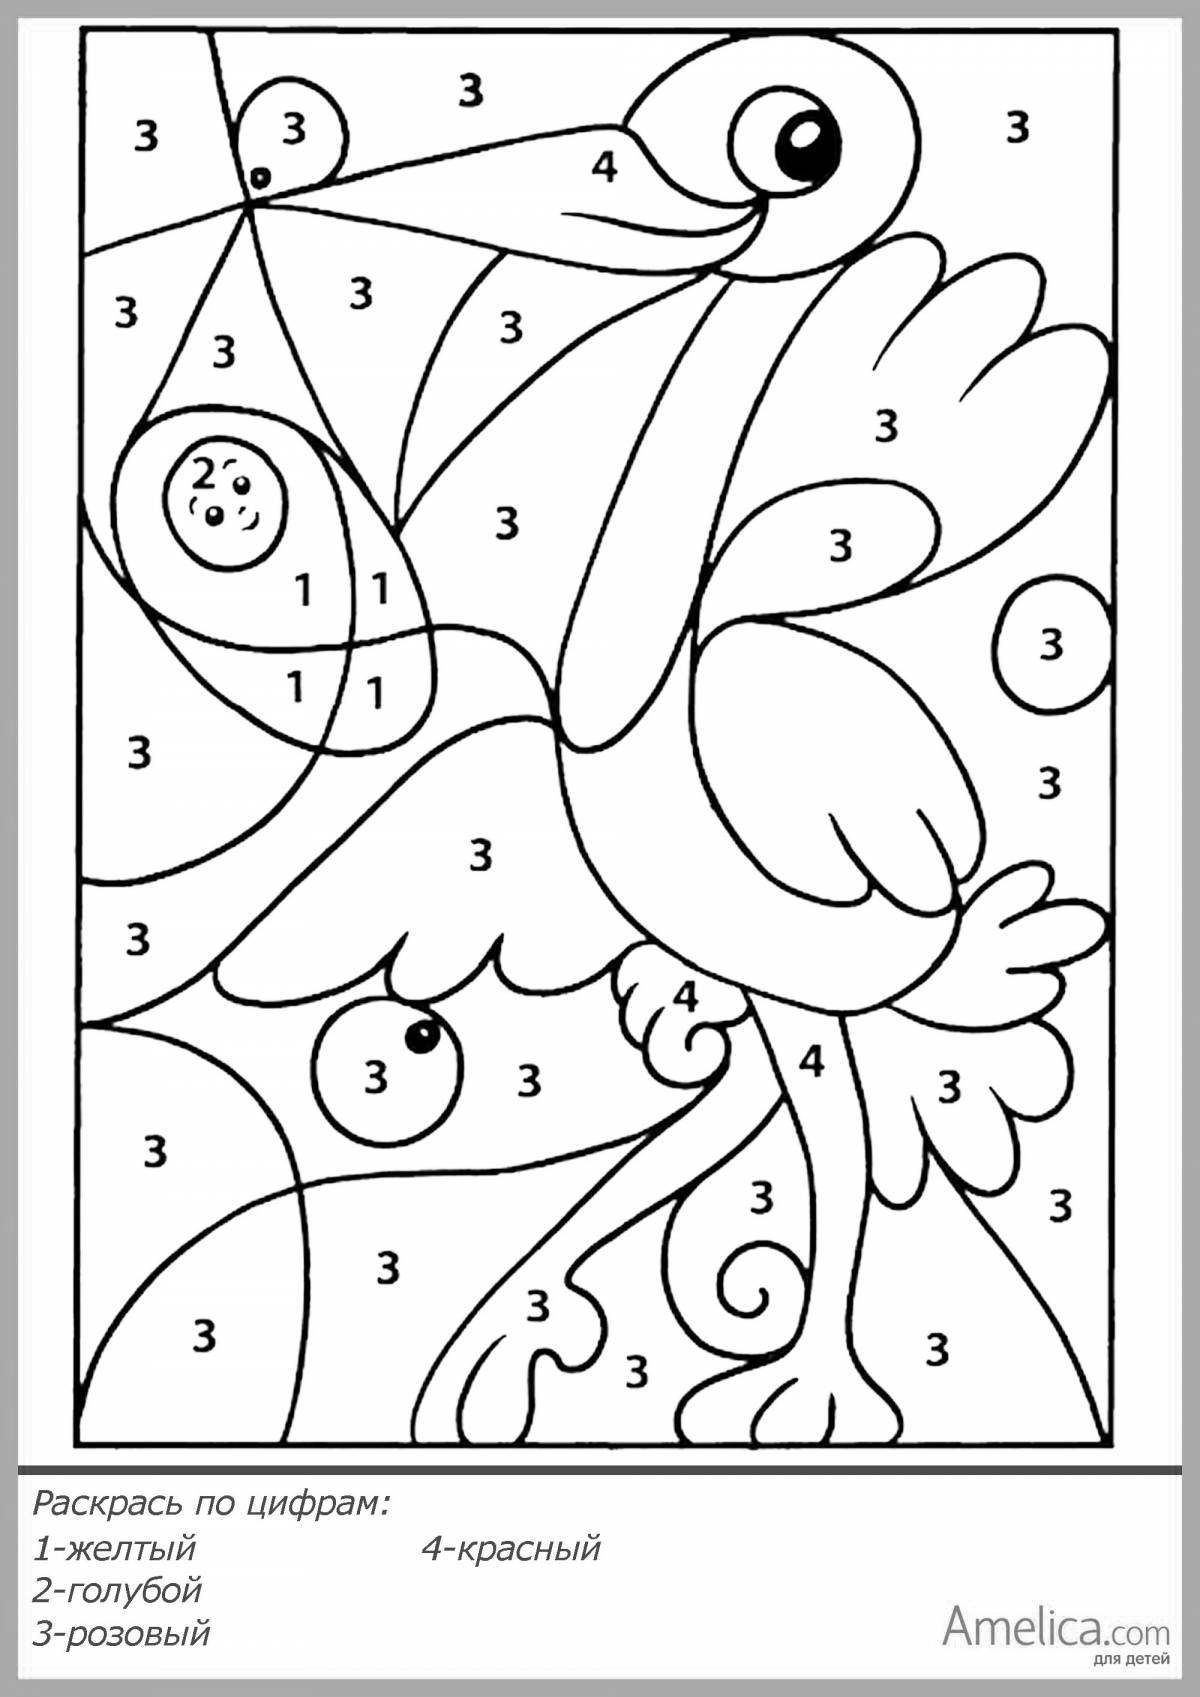 Creative coloring by numbers up to 10 for preschoolers